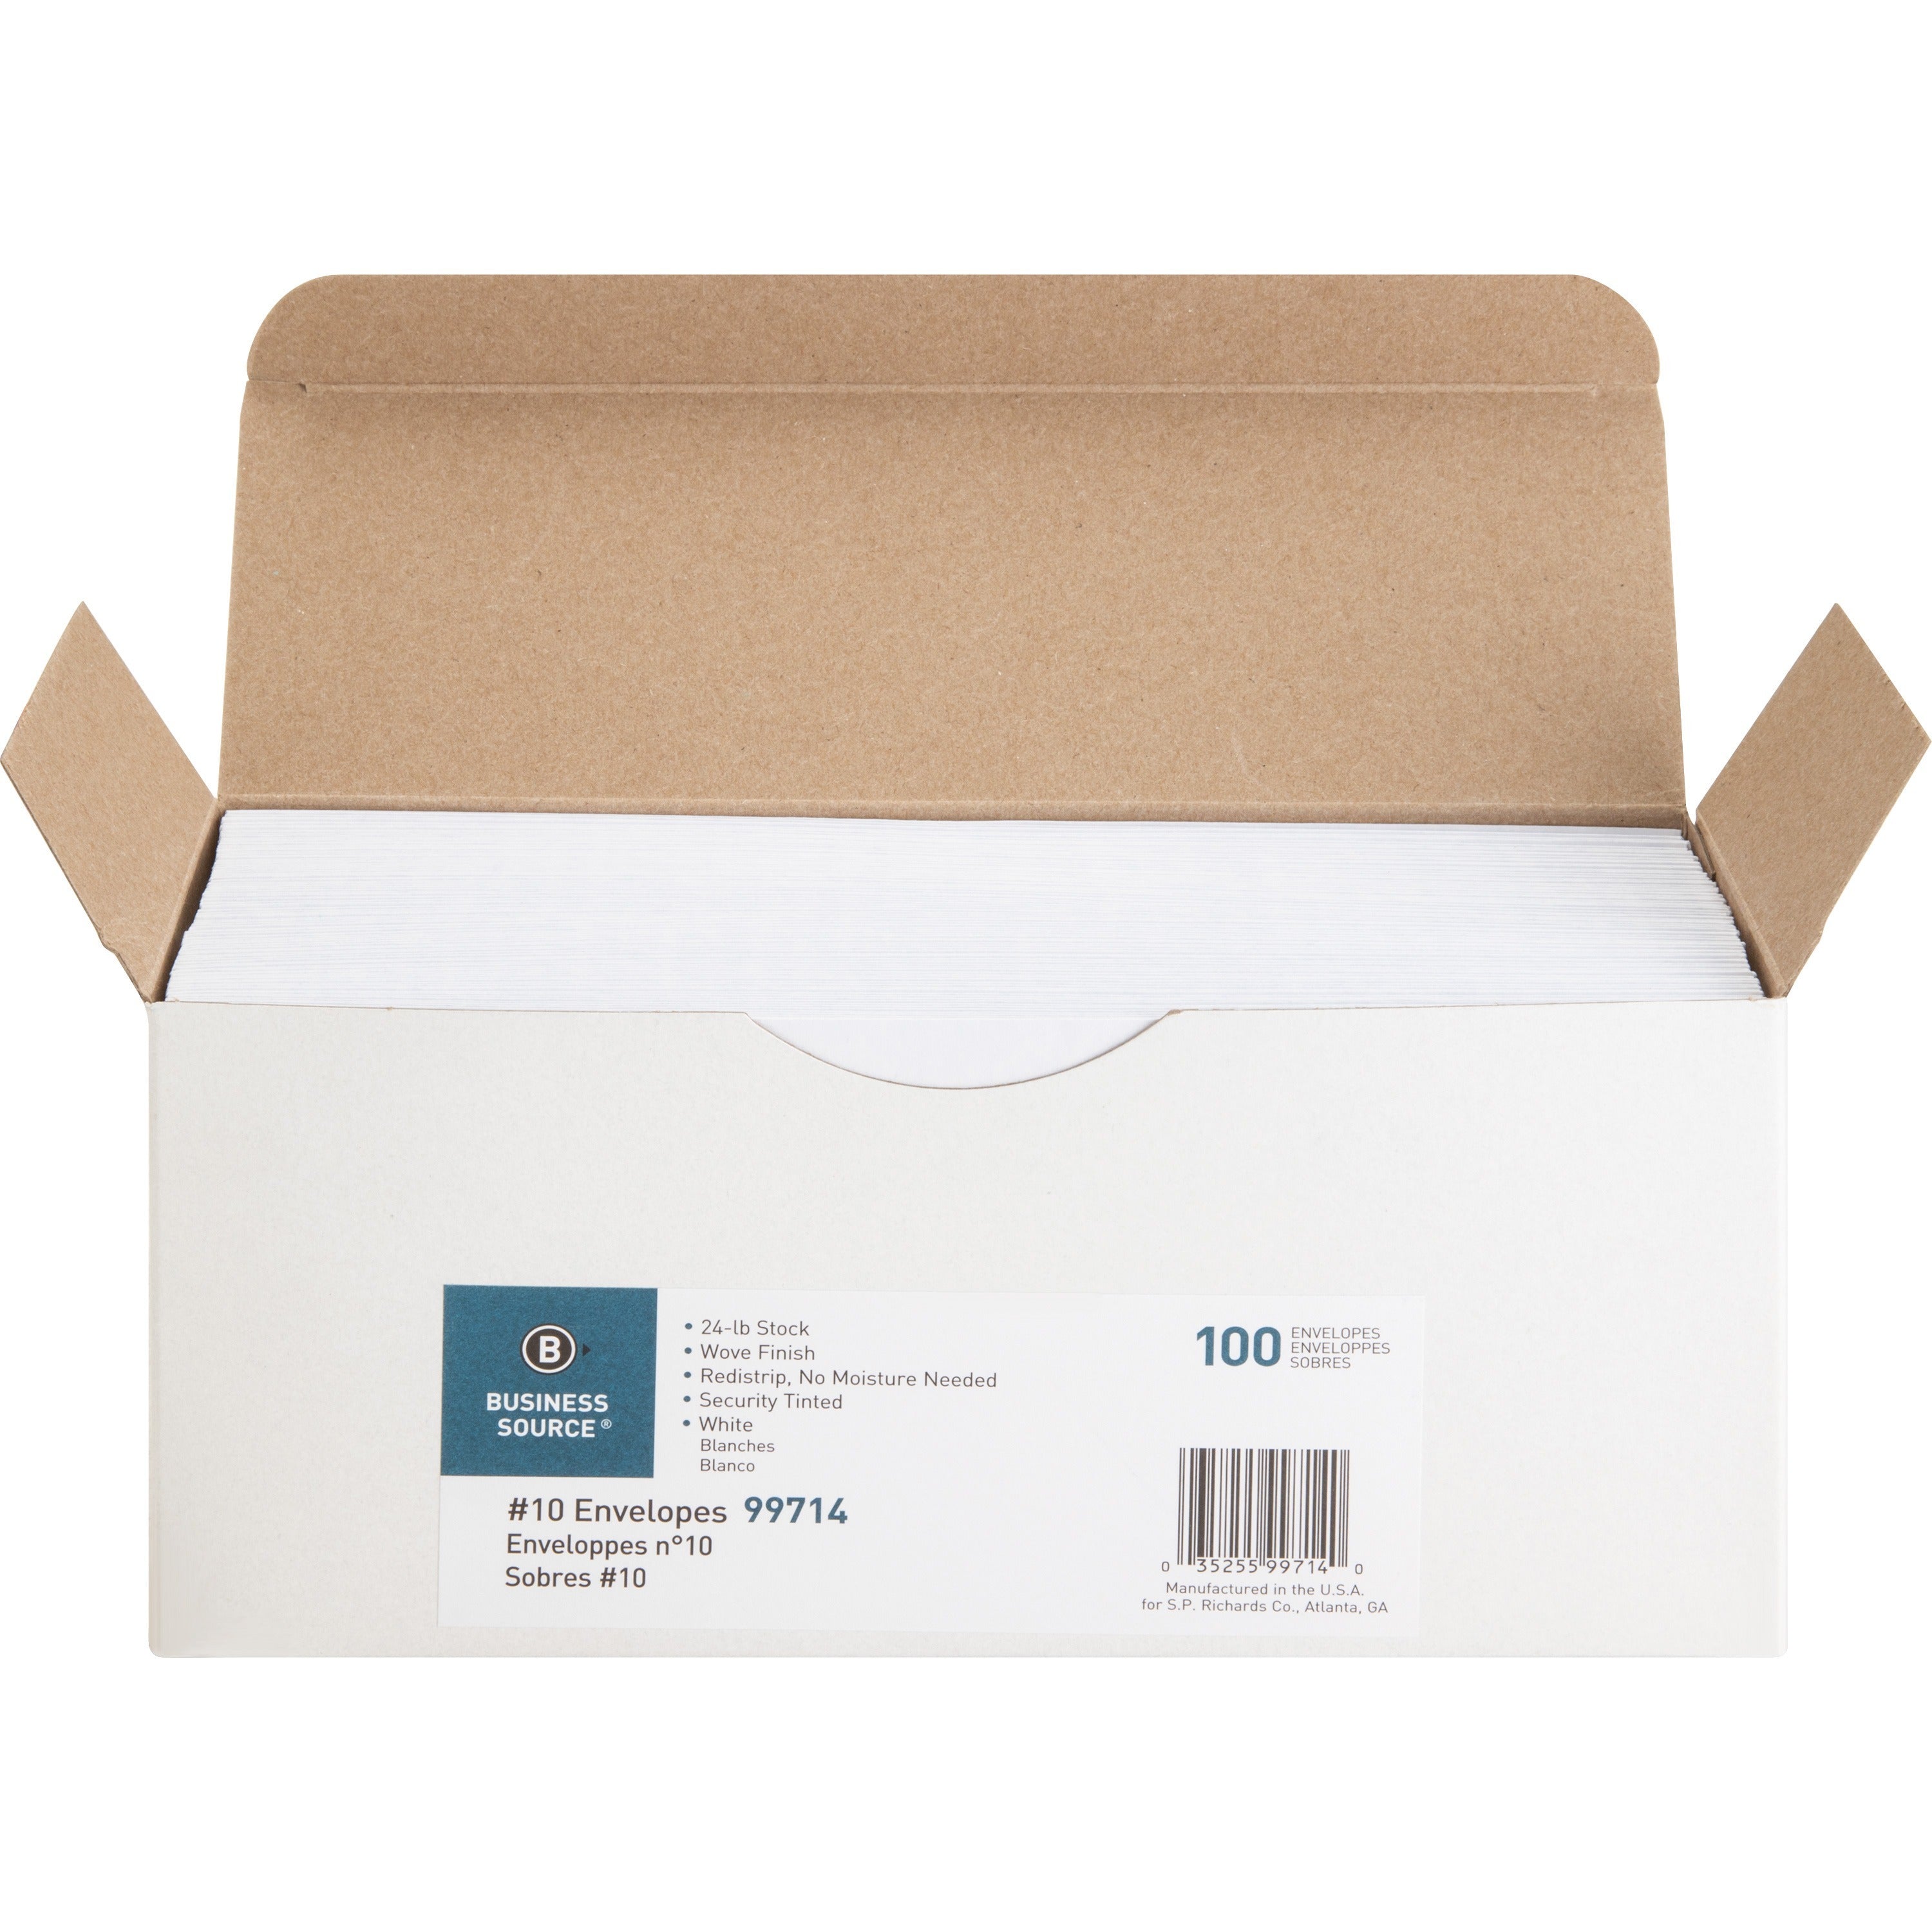 business-source-no-10-peel-to-seal-security-envelopes-business-#10-4-1-8-width-x-9-1-2-length-24-lb-peel-&-seal-wove-100-box-white_bsn99714 - 1